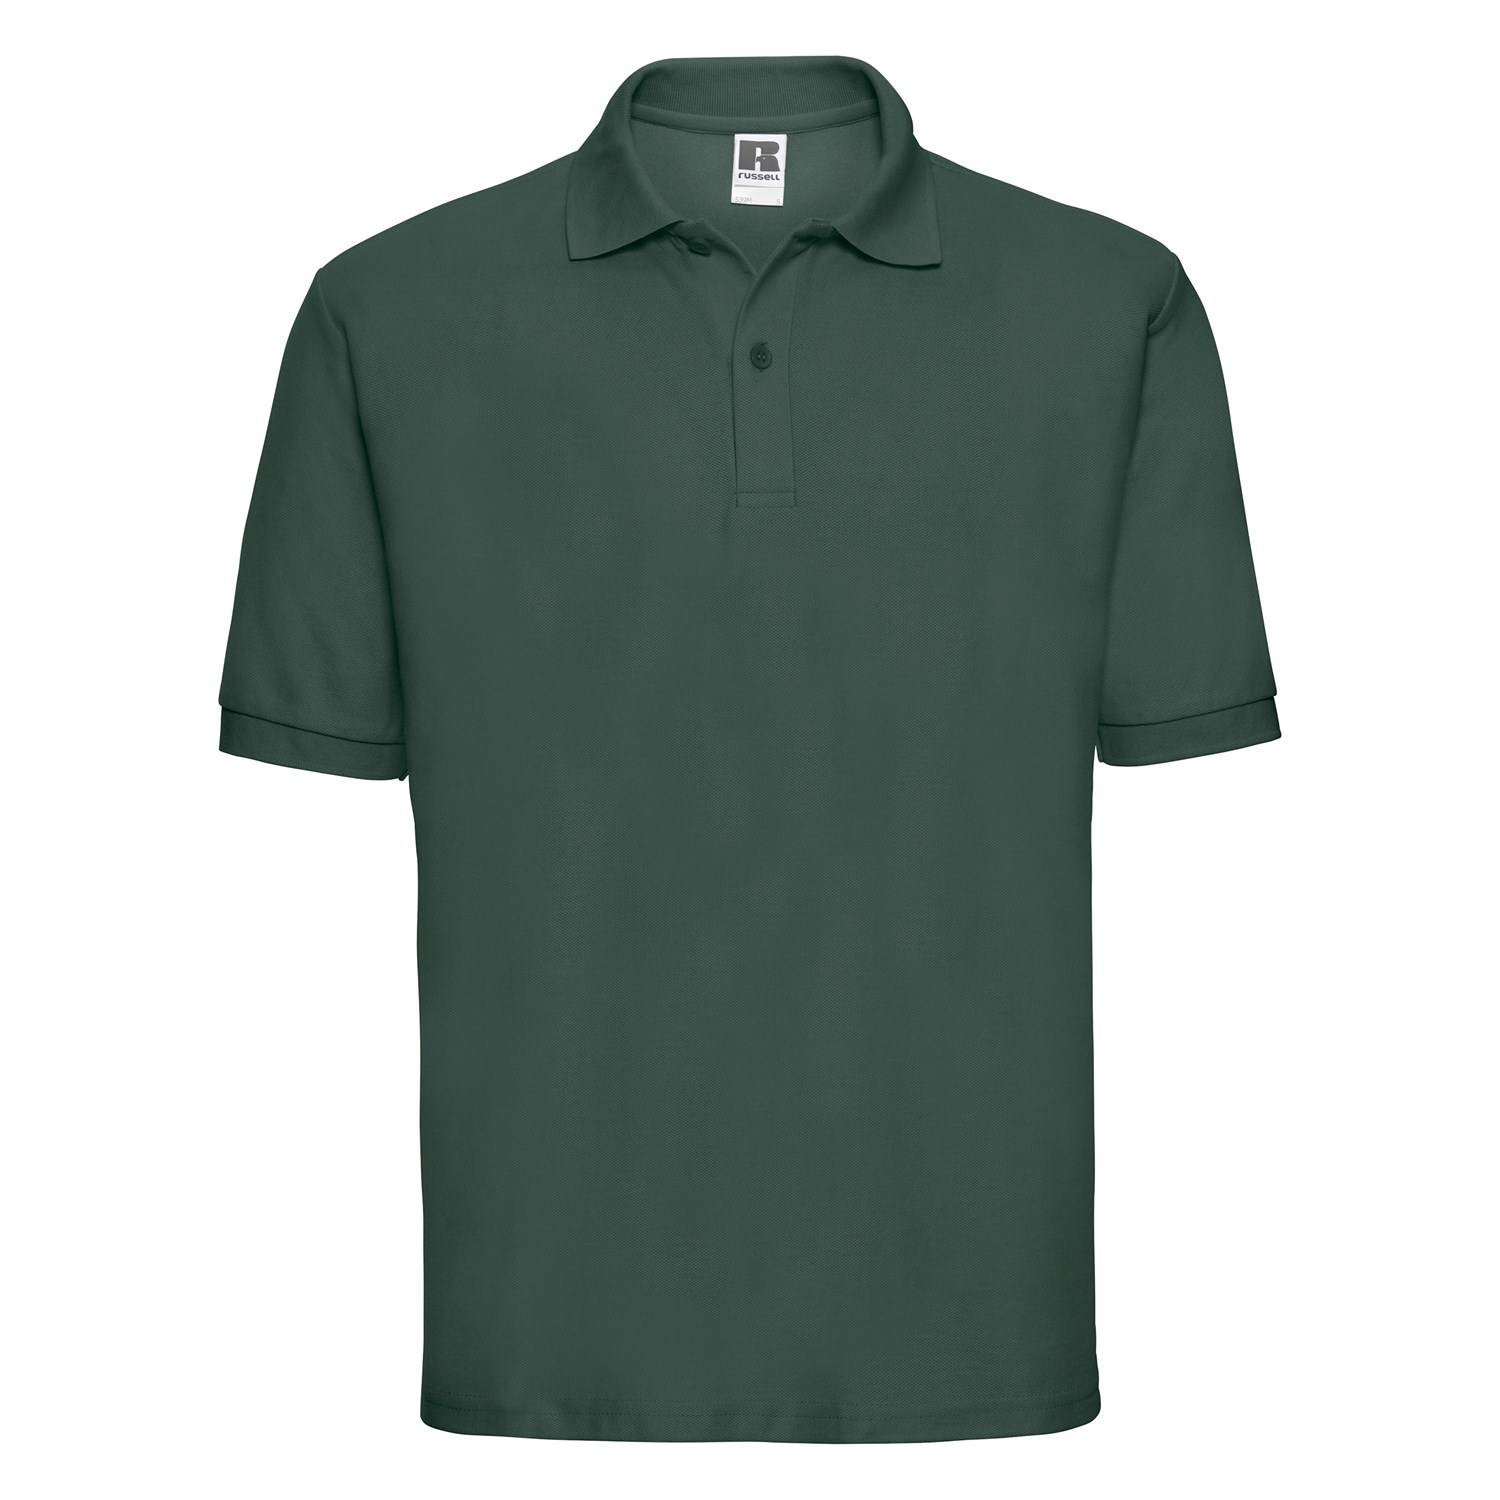 Men's Green Polycotton Polo Shirt Russell